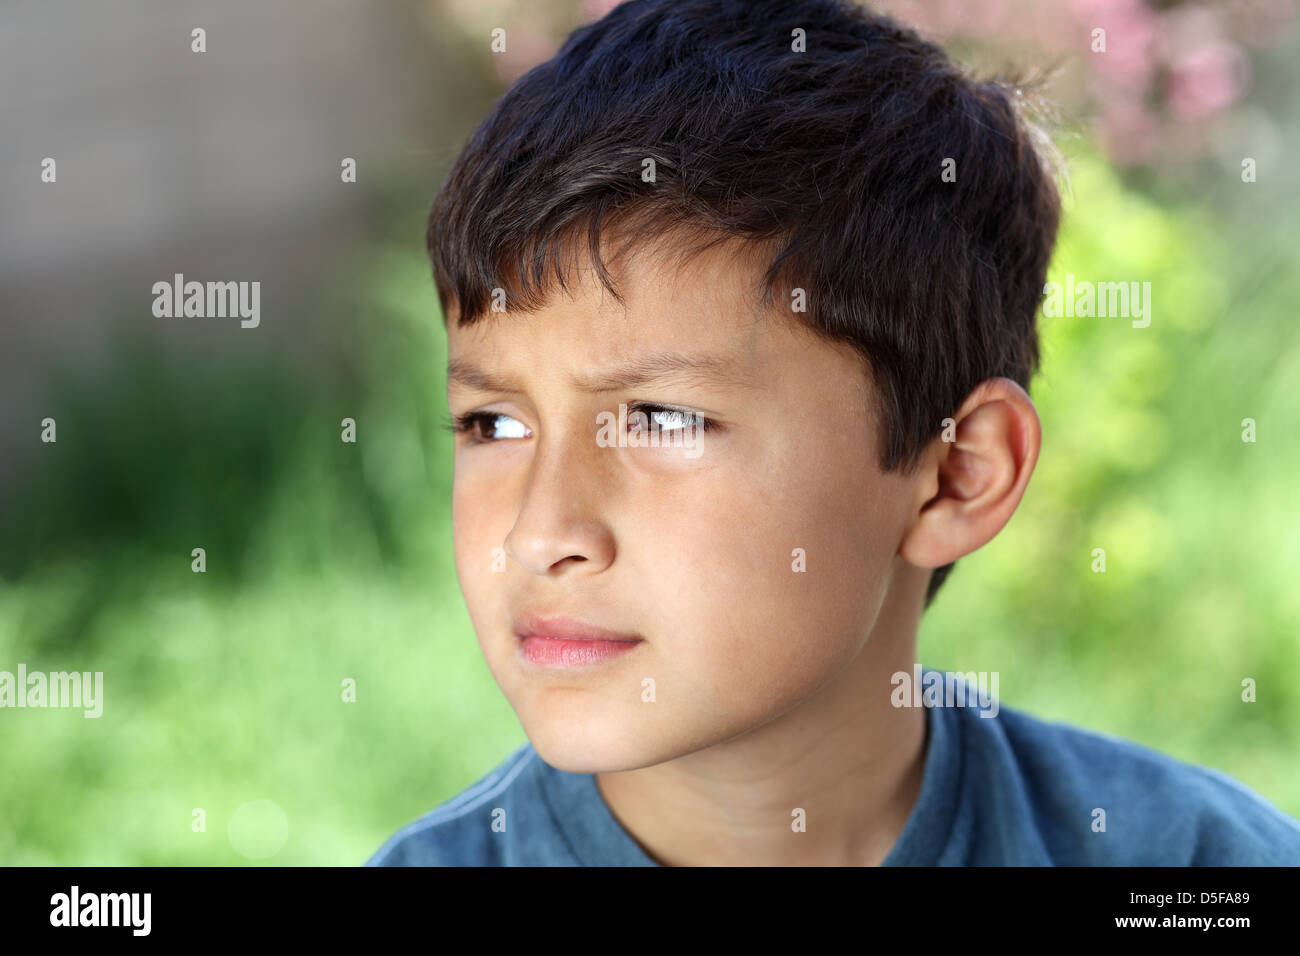 Smiling young boy outside with copy space to left Stock Photo